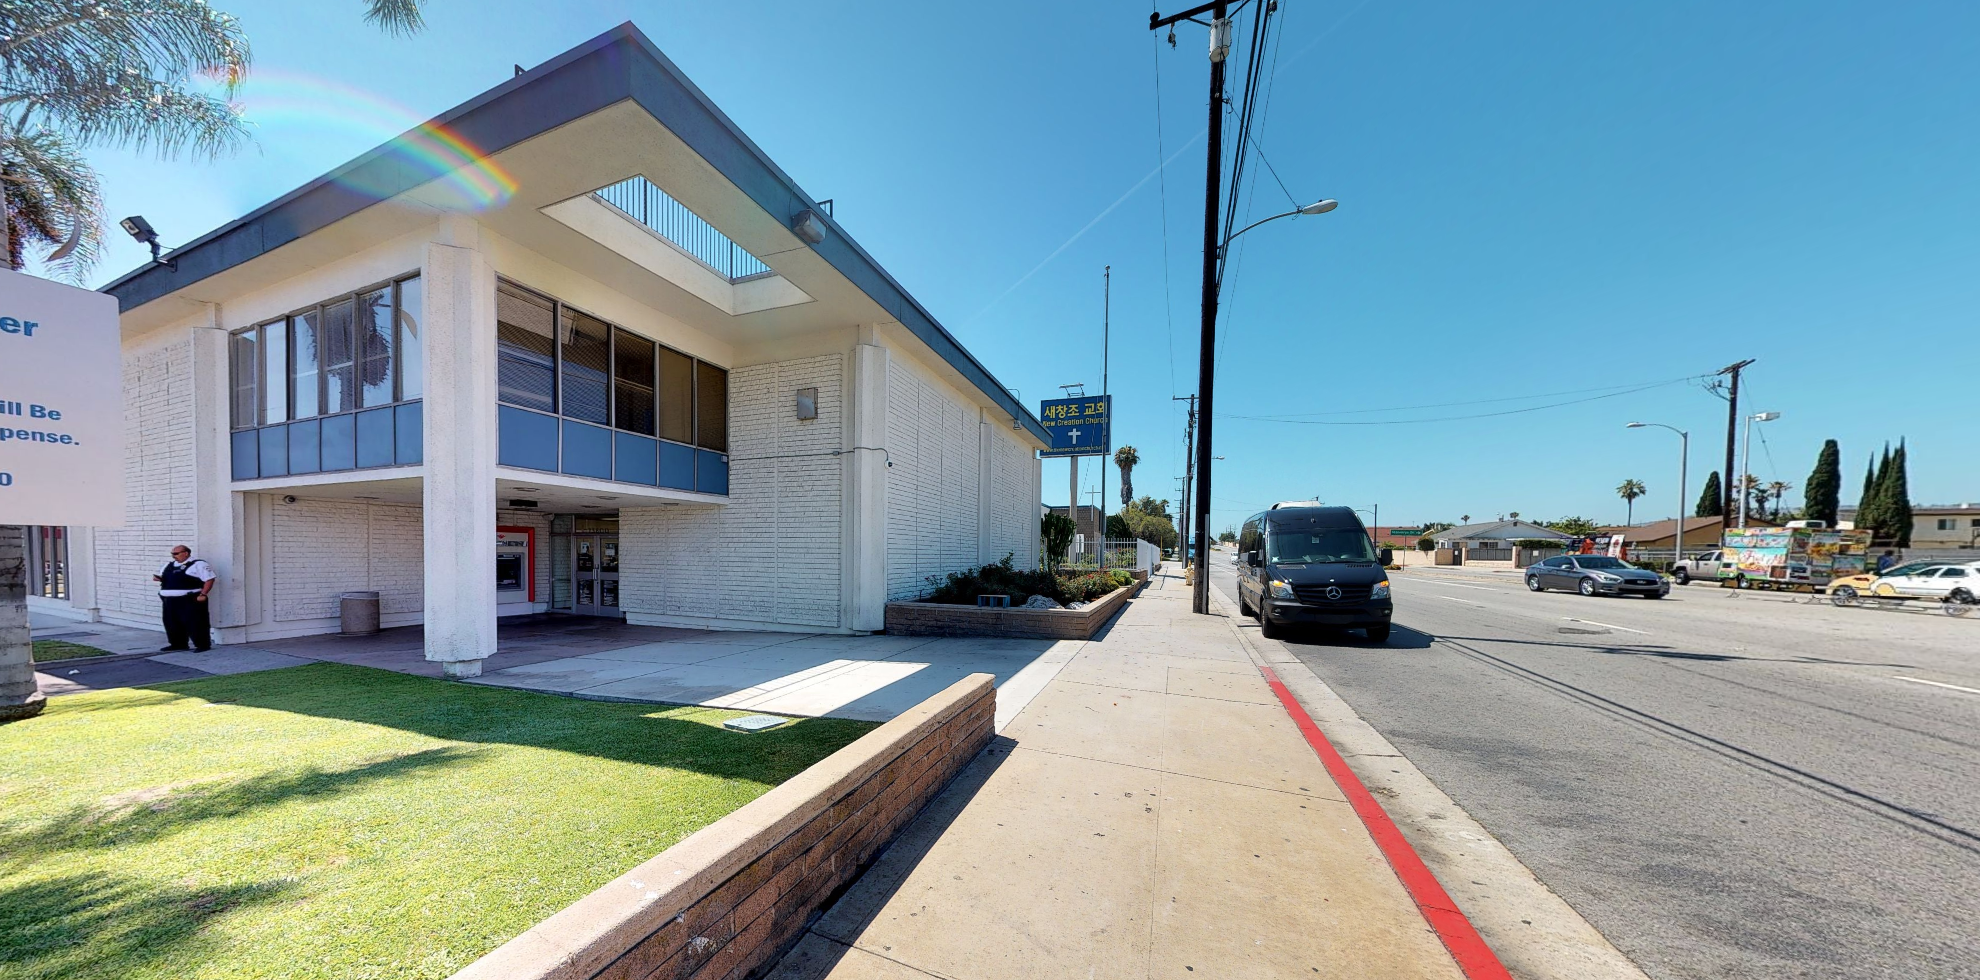 Bank of America financial center with walk-up ATM | 23800 Vermont Ave, Harbor City, CA 90710